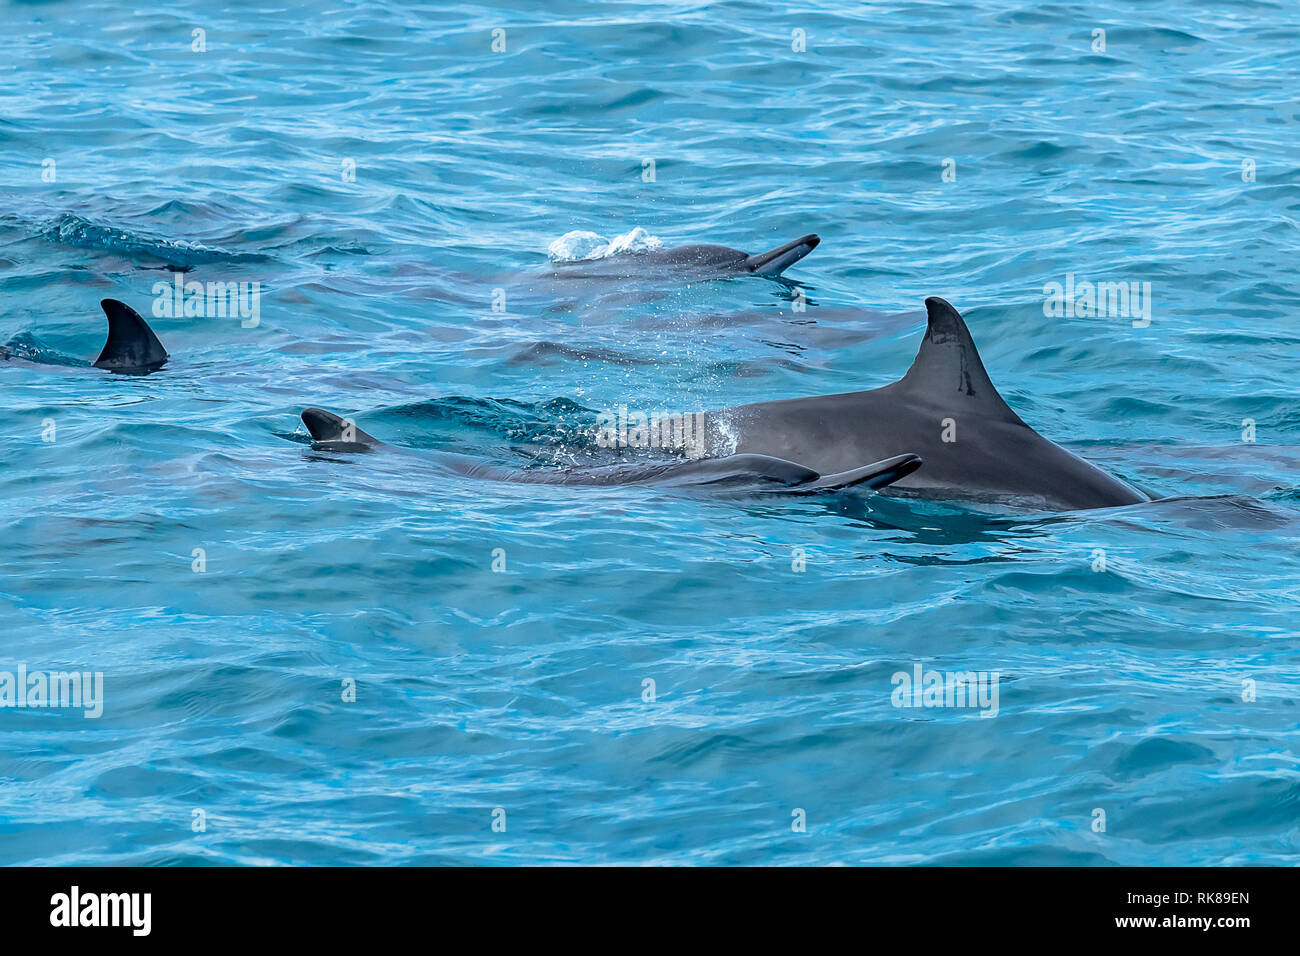 Wild dolphins swimming at the surface of the ocean in Maldives. Stock Photo